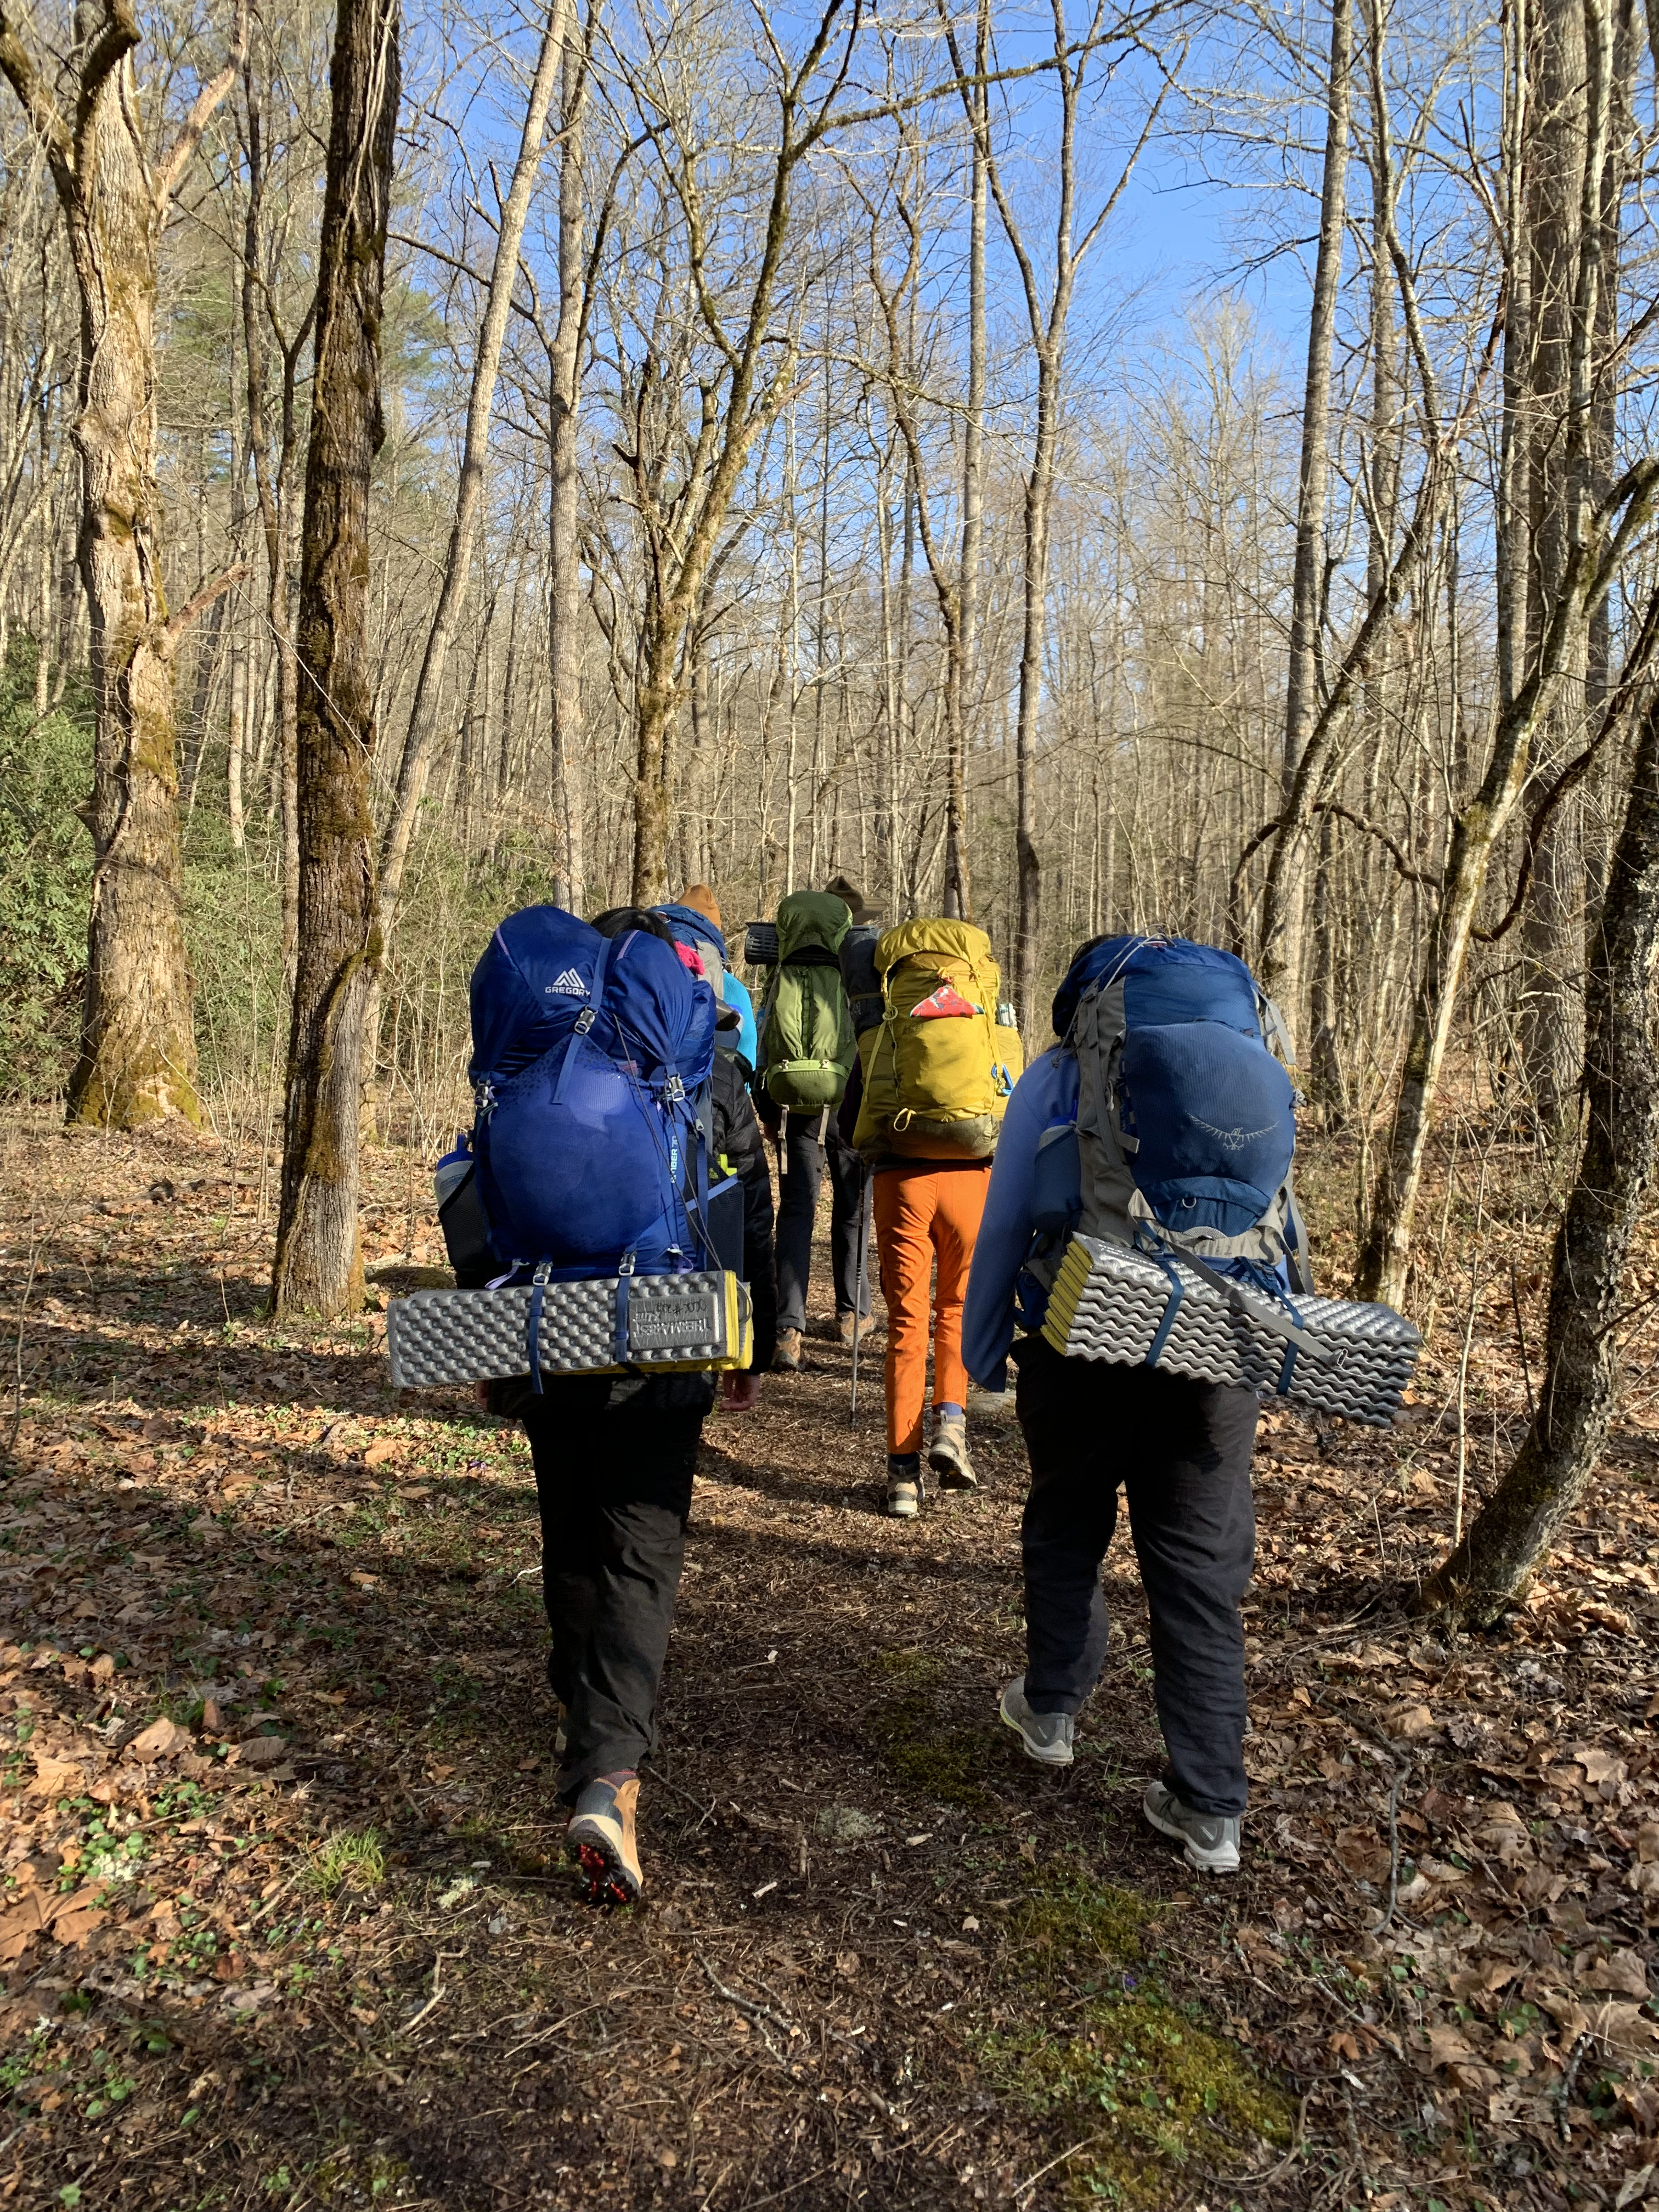 view from behind of five people with packs on their backs hiking through a forest